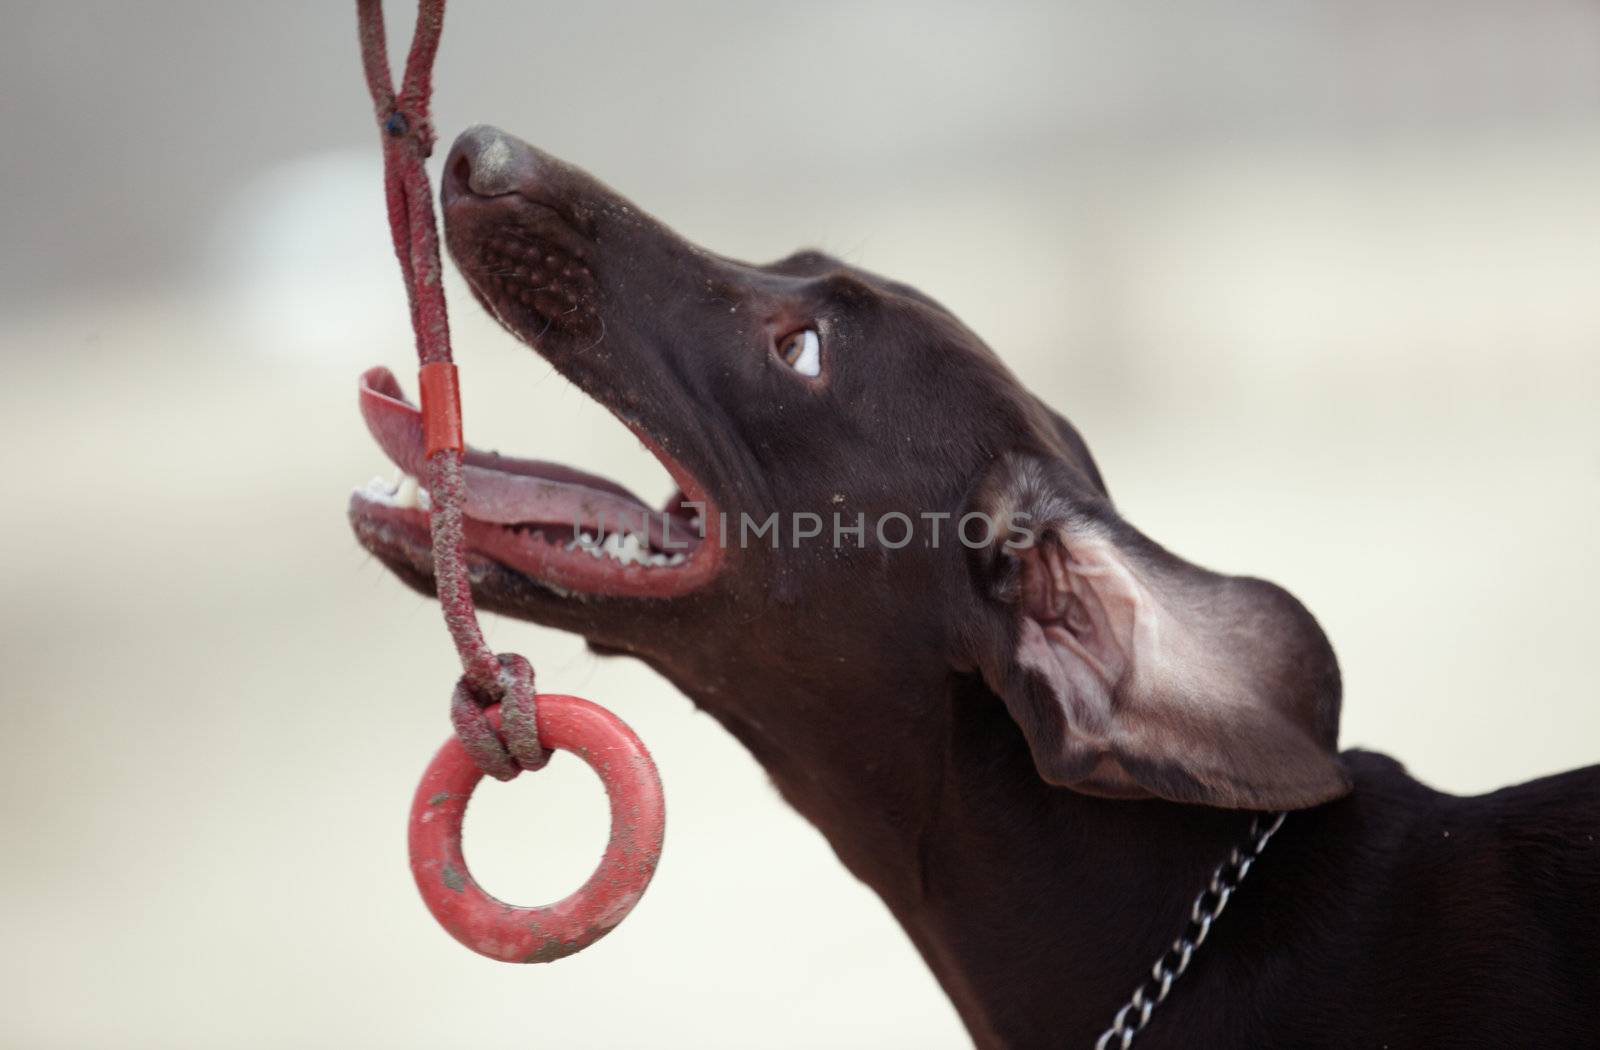 Young brown dog playing with rubber toy outdoors. Natural light and colors